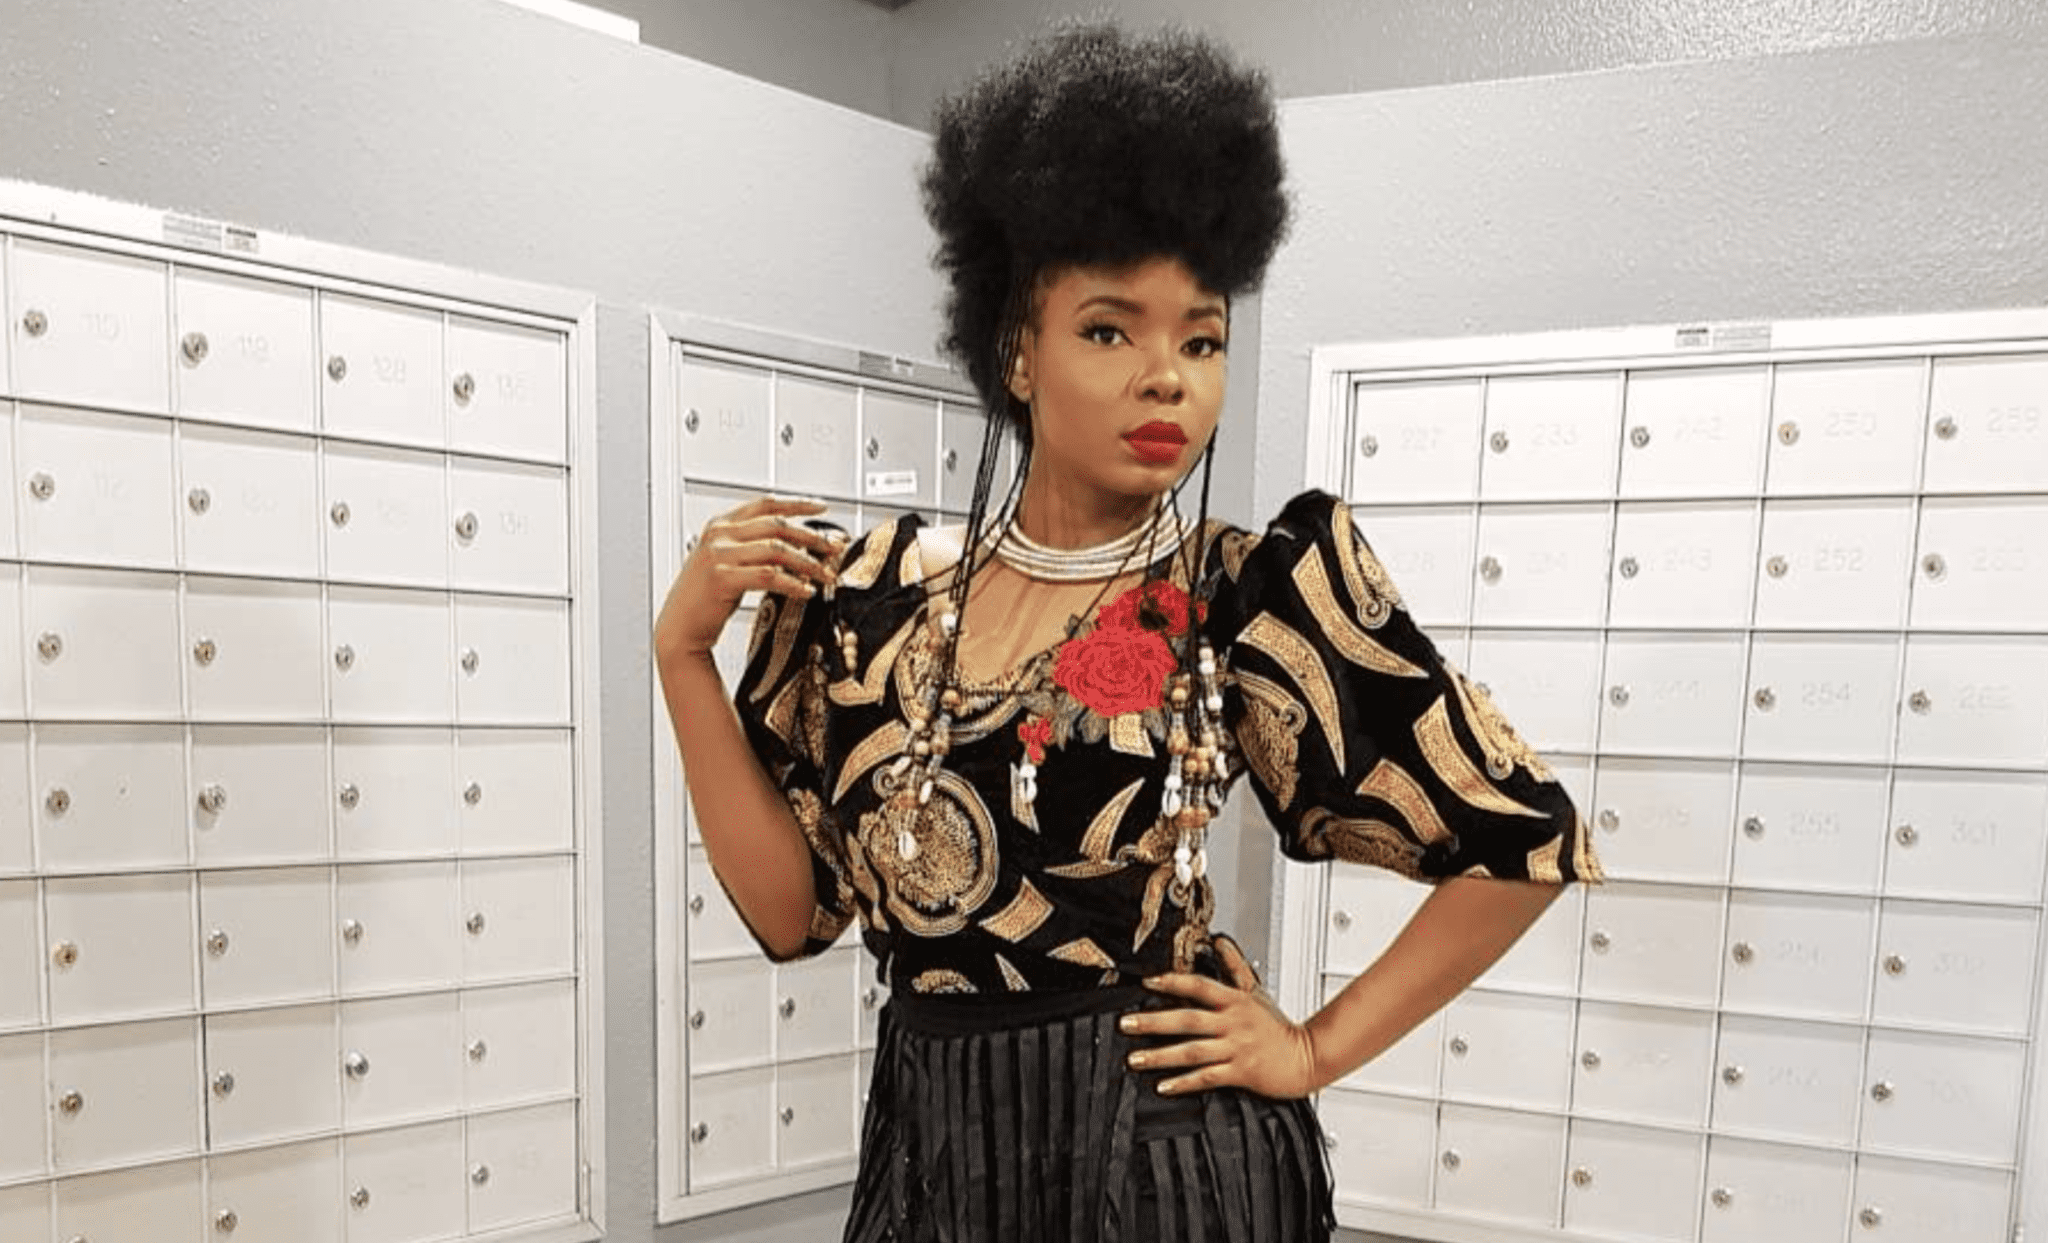 Yemi Alade’s upcoming third studio album “Black Magic” is now available for pre-order